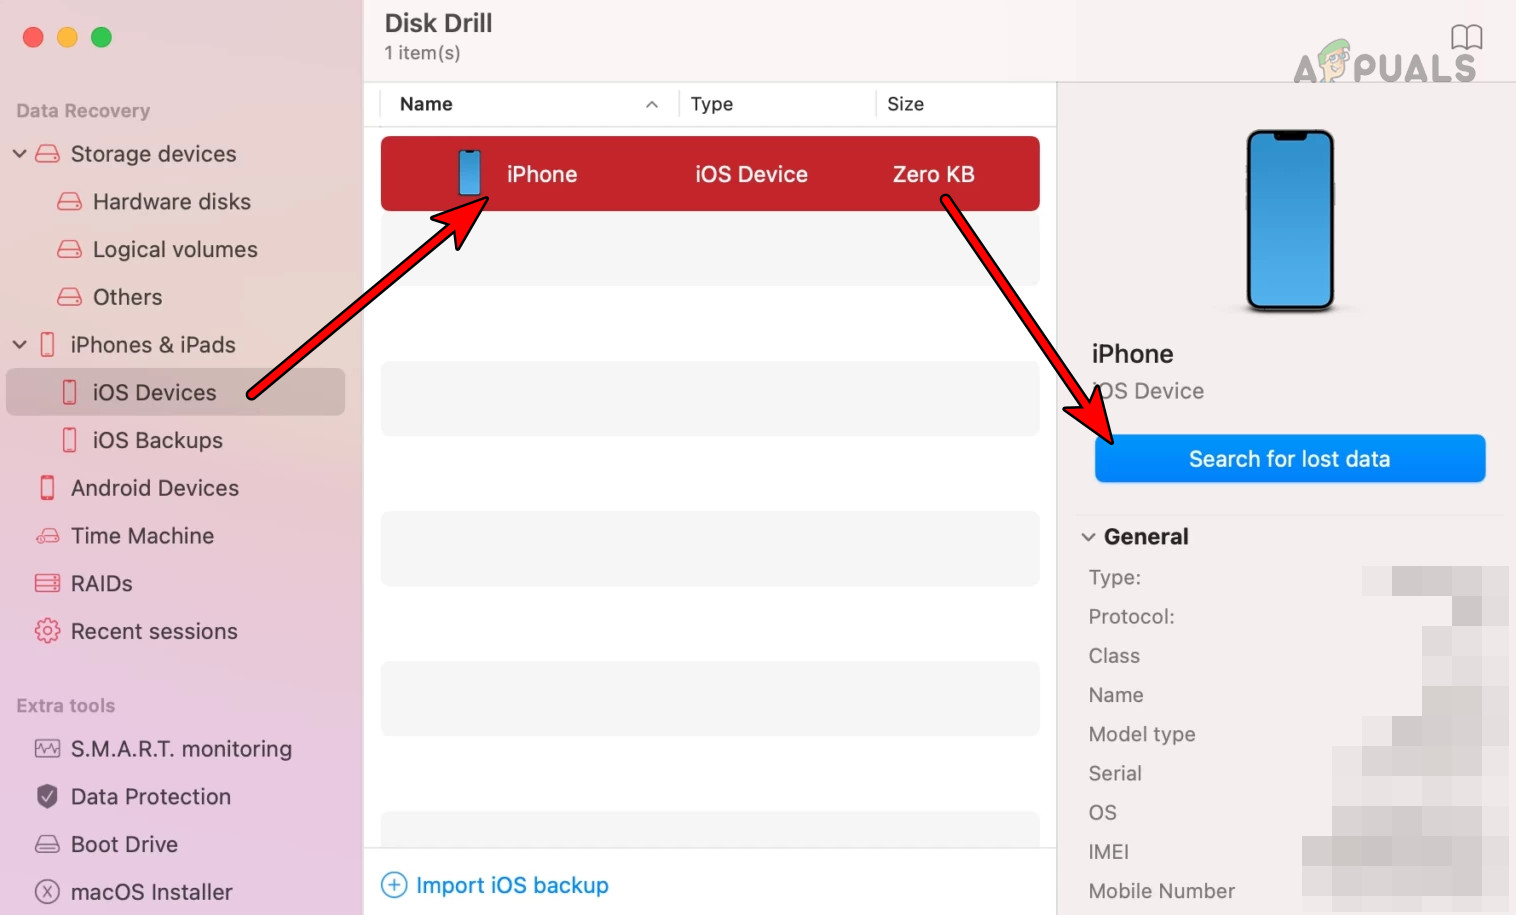 Search for Lost Data on the iPhone Through the Disk Drill